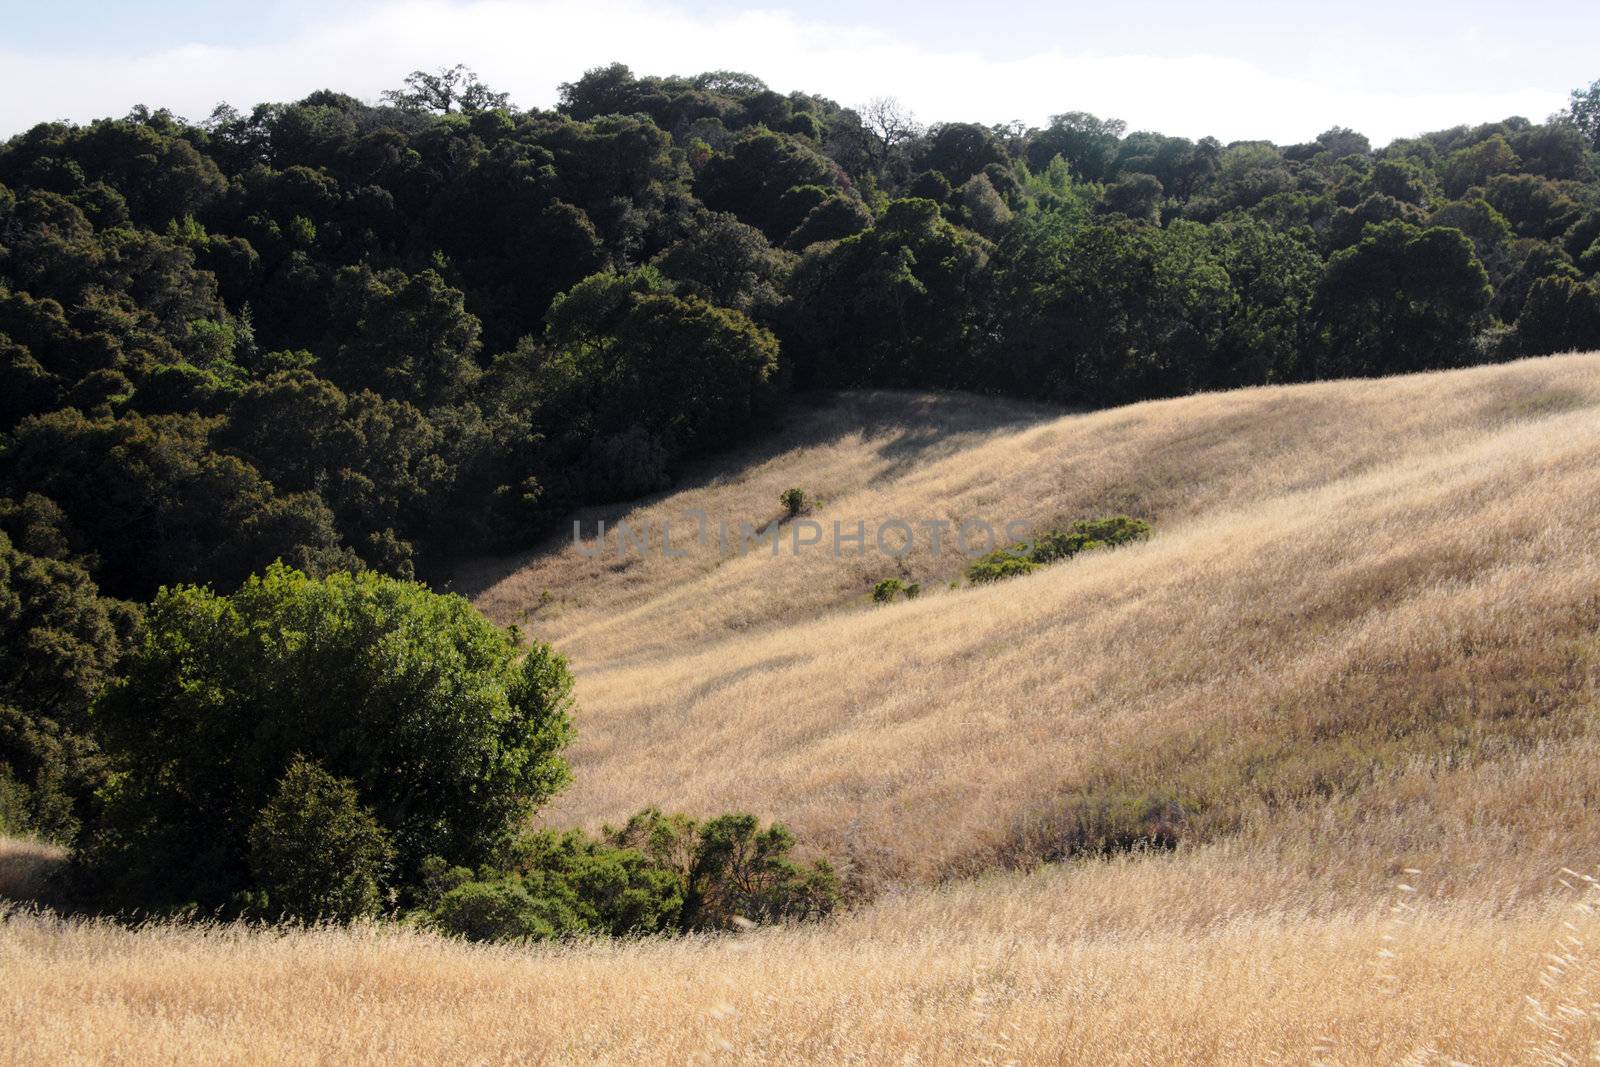 golden grasses and trees on the curving slopes of a hill in summer